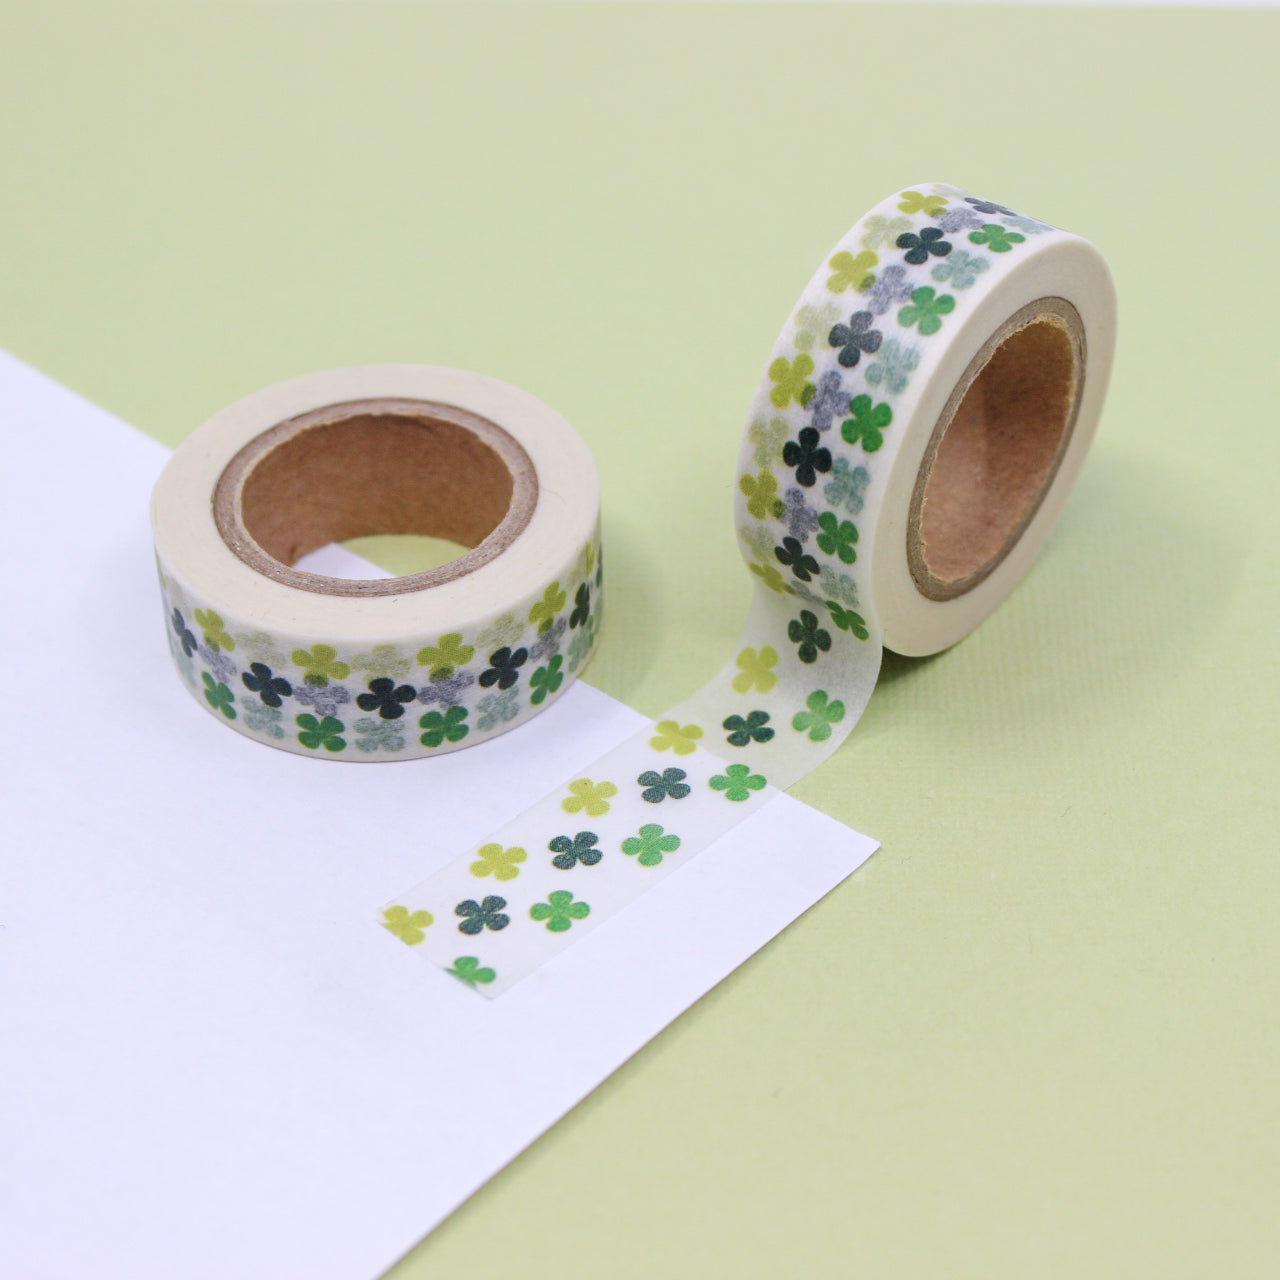 This fun green clover tape is a refreshing, lively pattern that is perfect for your BUJO and craft projects. Spring is in the air with this green clover tape, perfect for your St. Patrick's Day projects and spreads. This tape is sold at BBB Supplies Craft Shop.